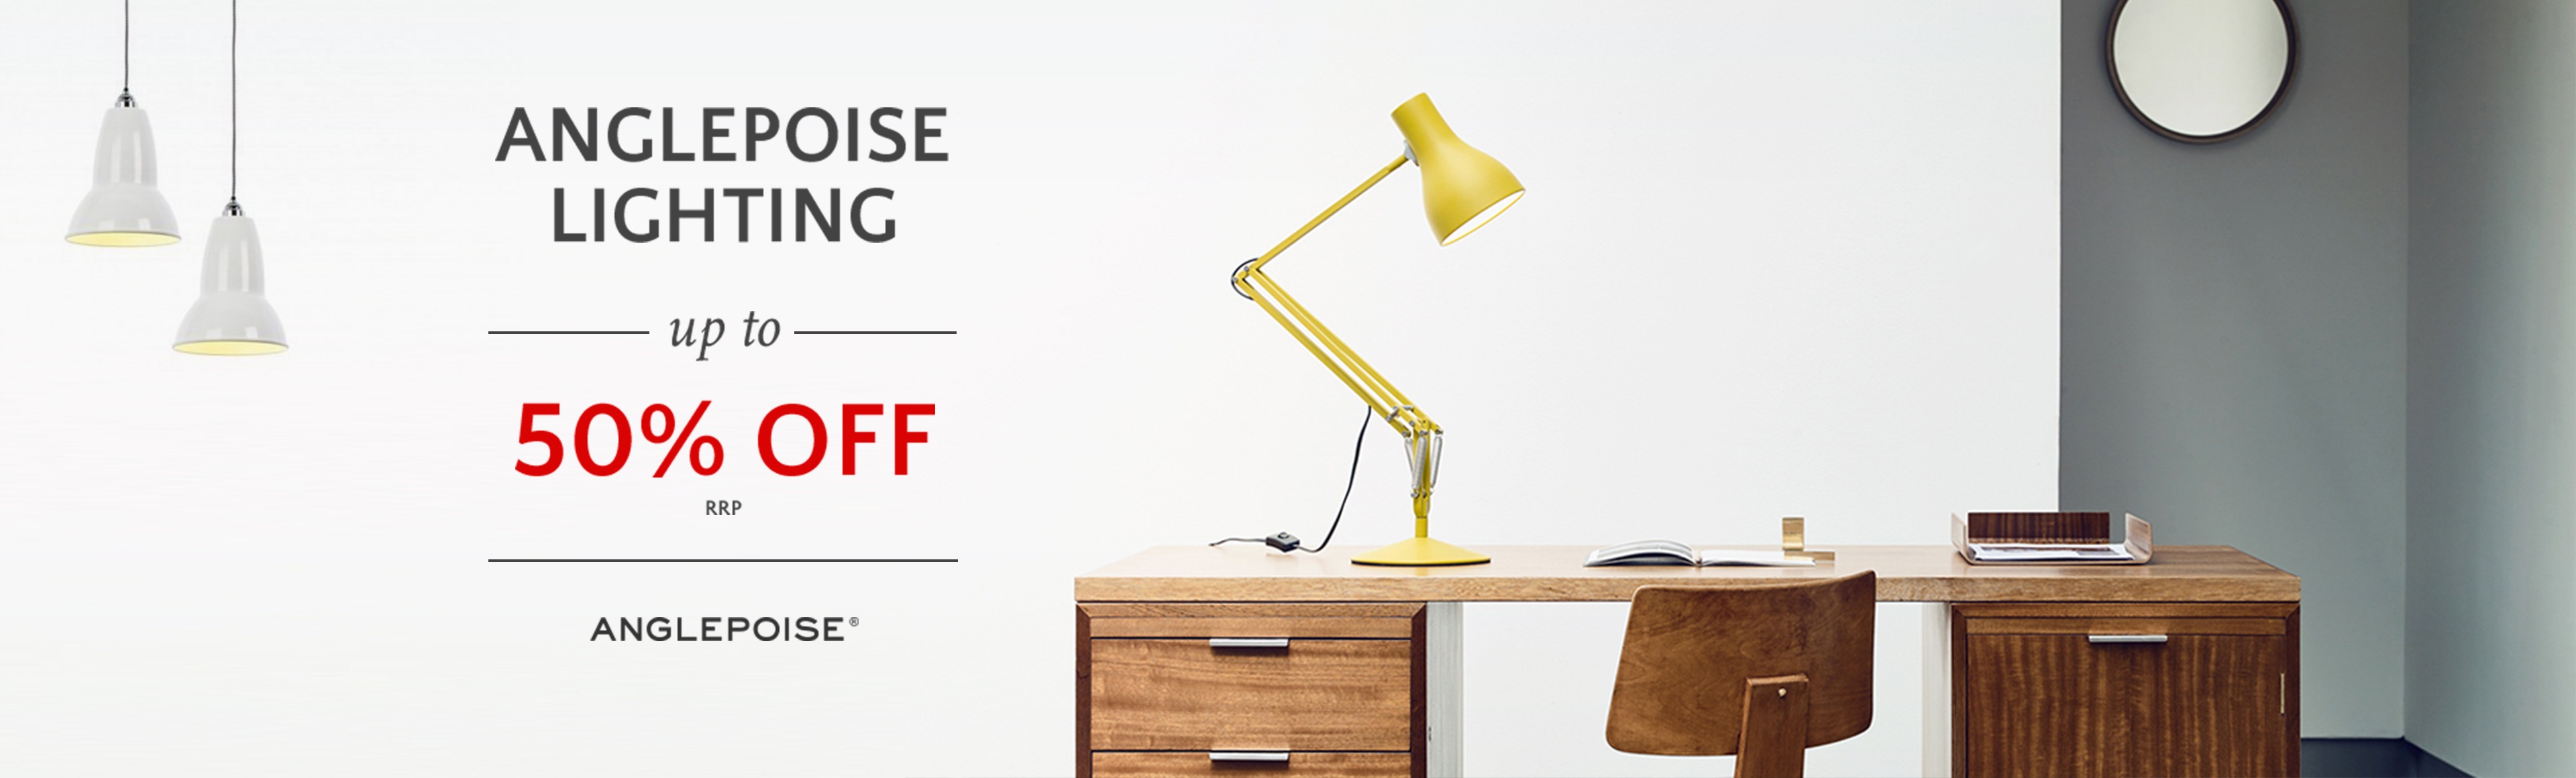 Anglepoise Lighting - up to 50% off RRP